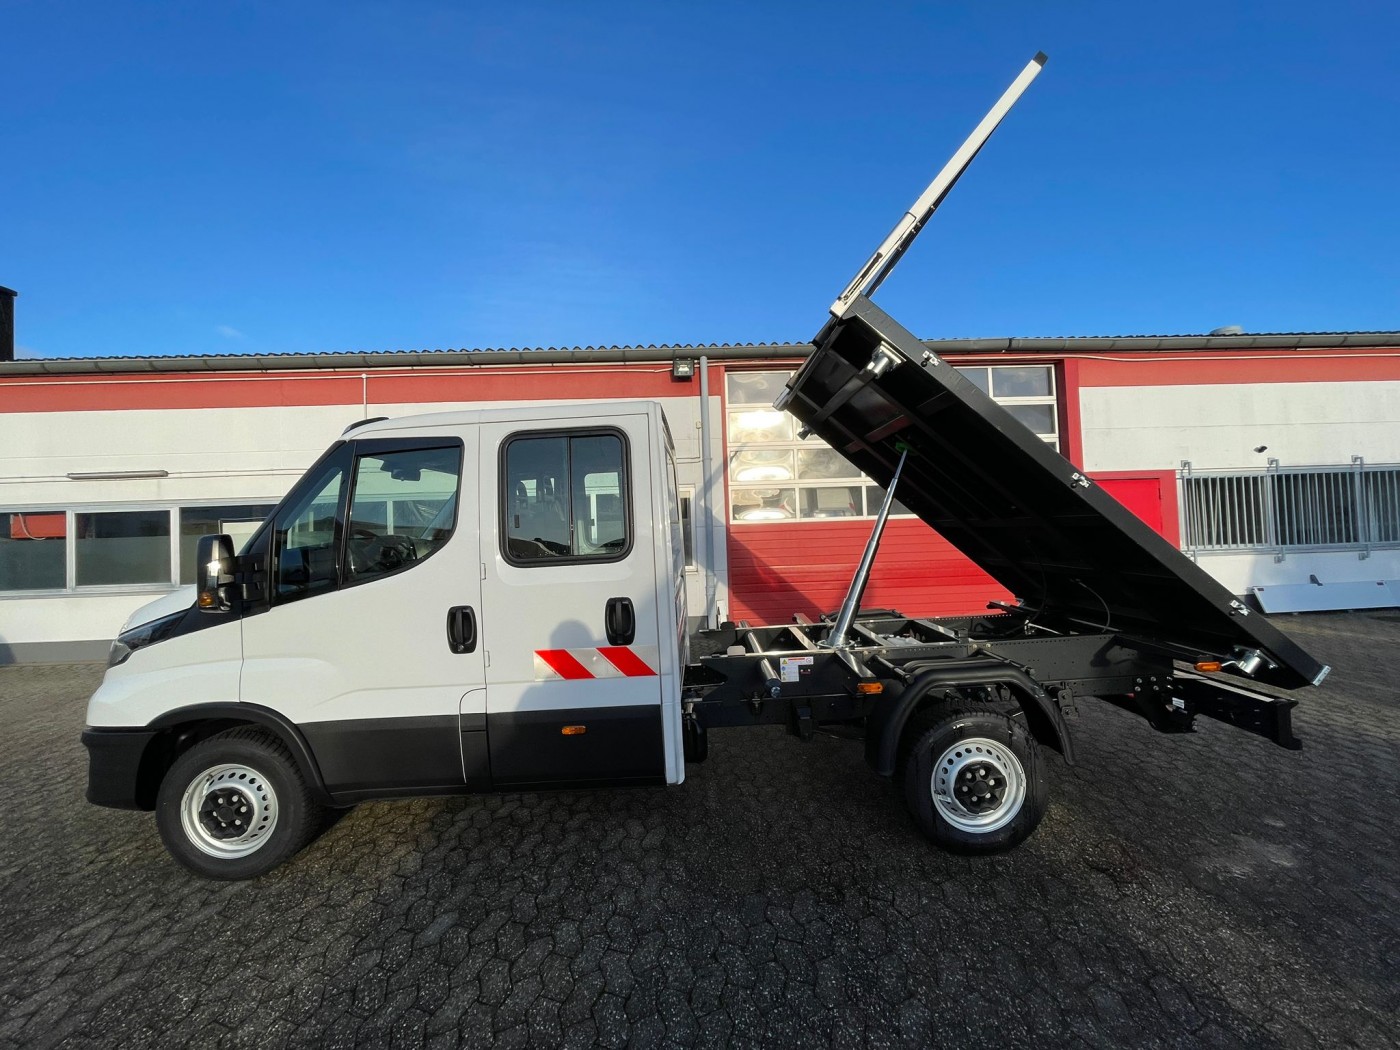 Iveco DAILY VII TIPPER 35S14 NEW A/C EURO6D